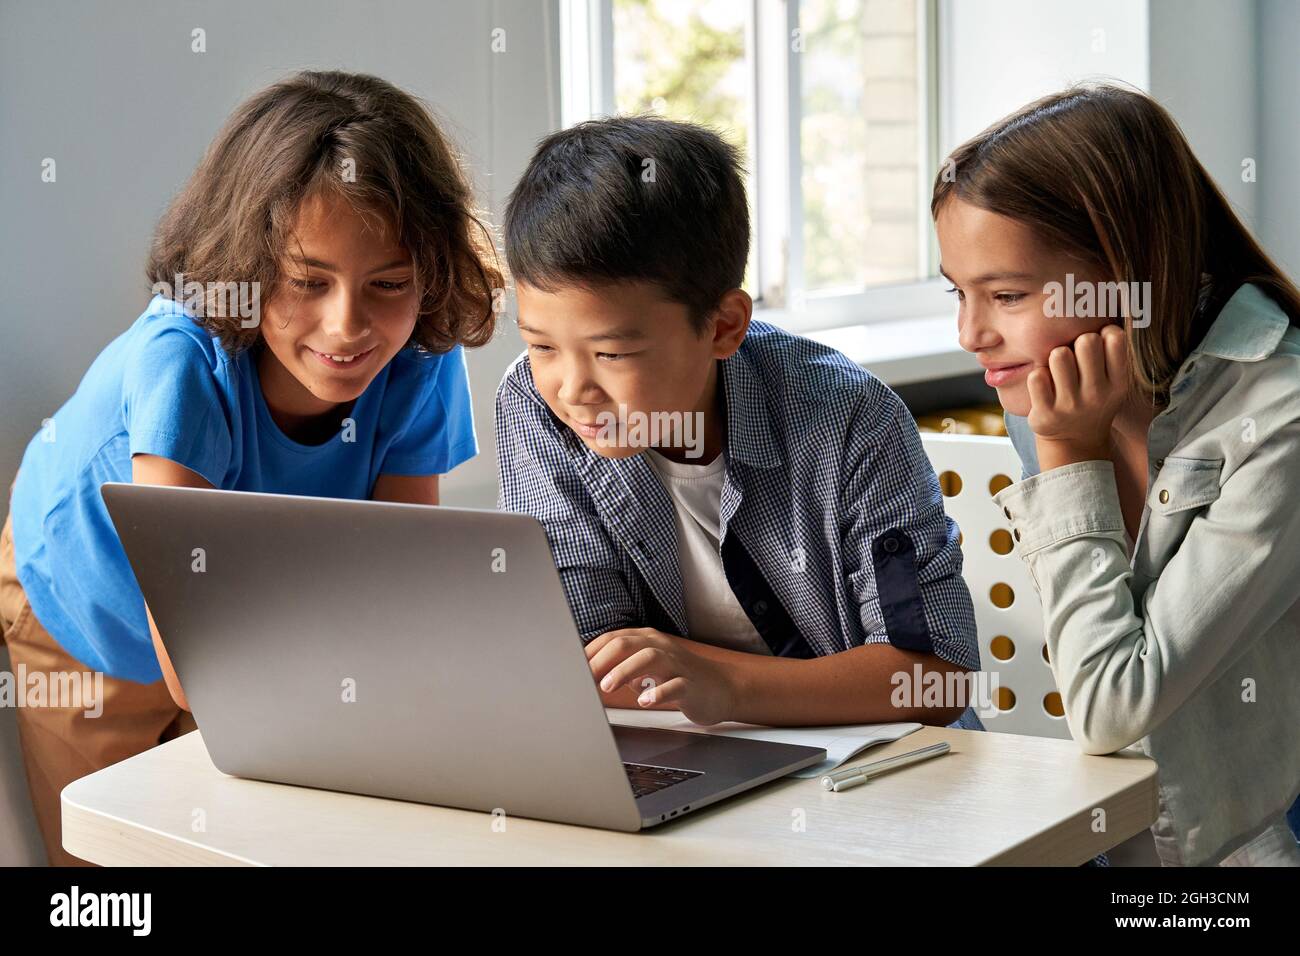 Diverse happy school kids using laptop computer together in classroom. Stock Photo